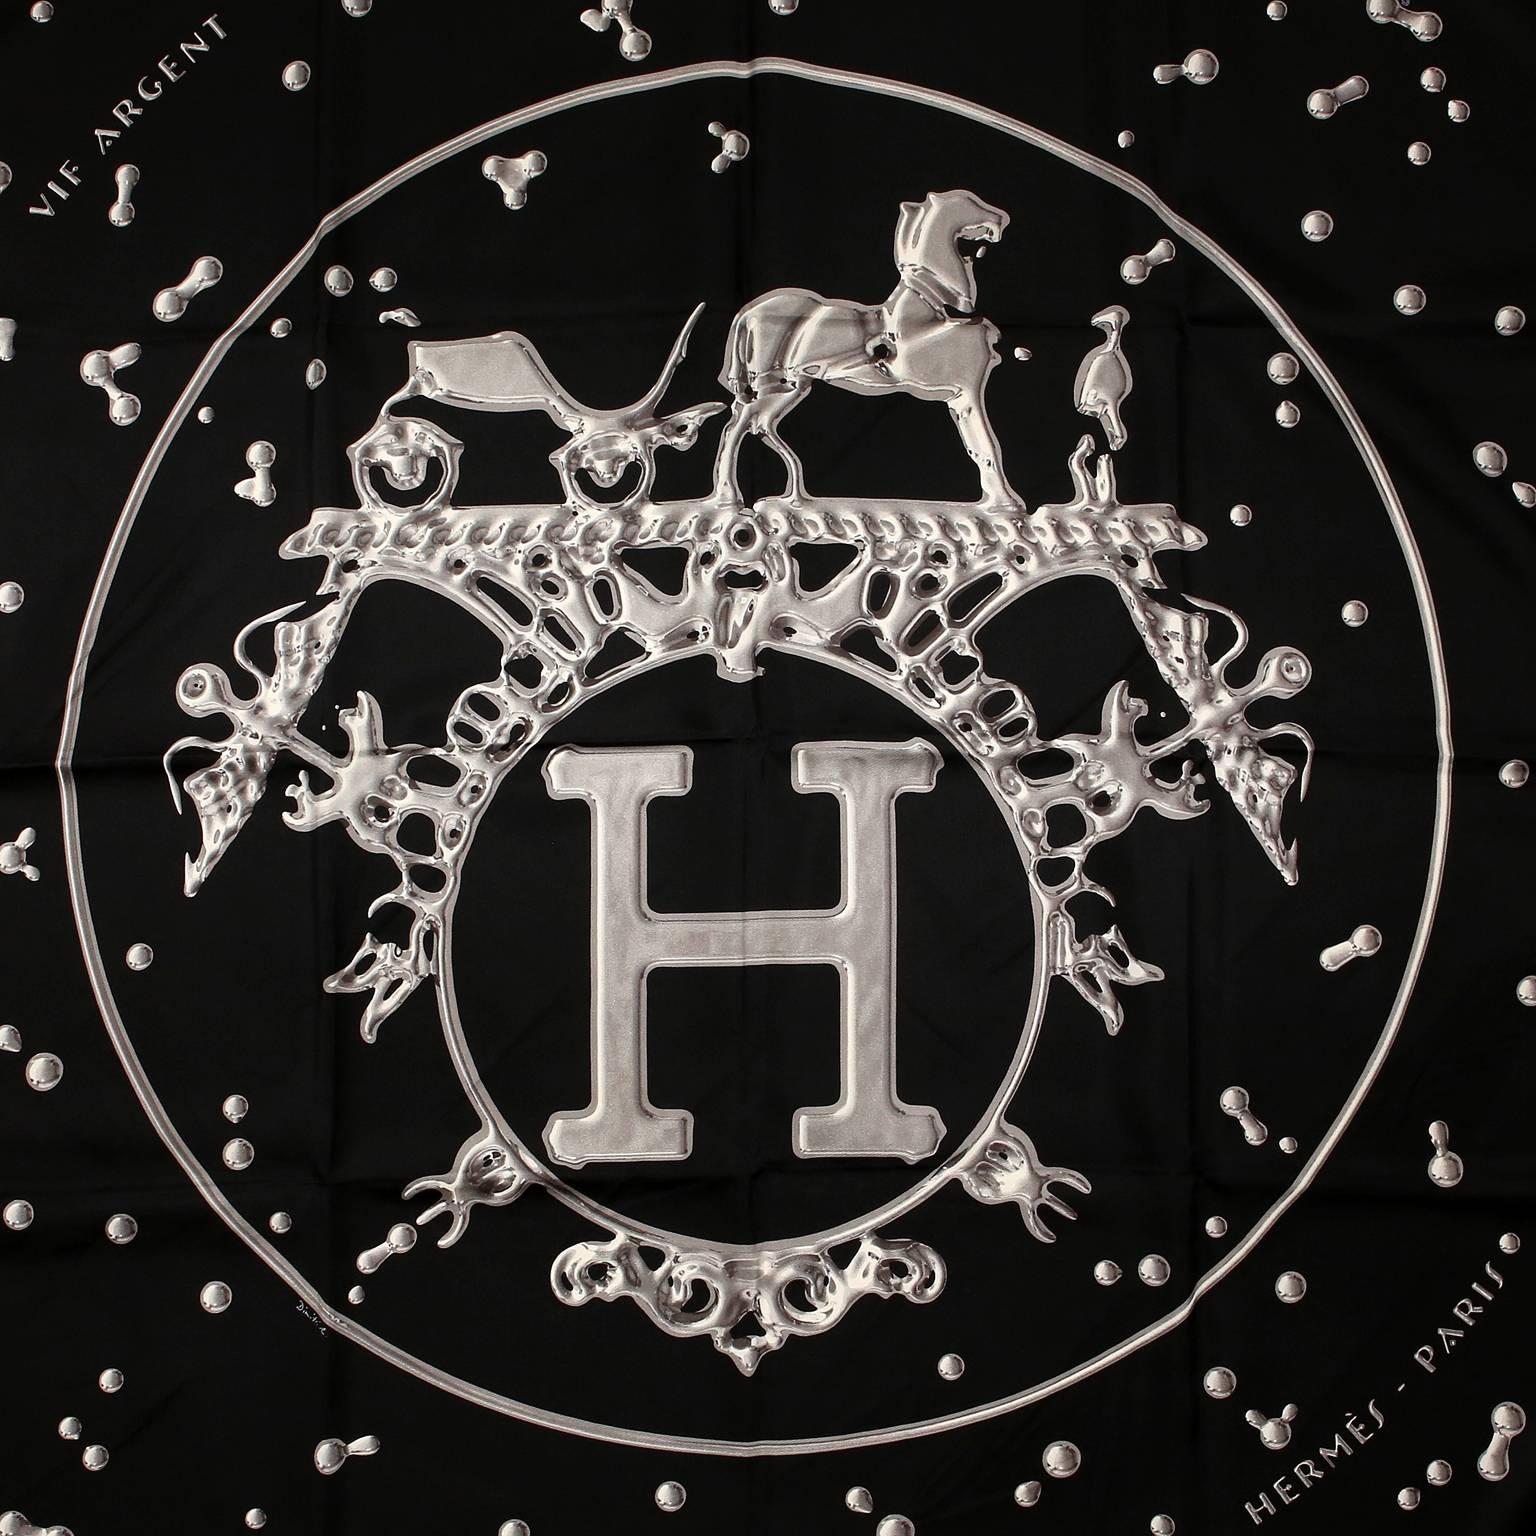 Hermès Black VIF Argent 90 cm Silk Scarf- PRISTINE
Designed by Dimitri Rybaltchenko and first issued in 2007. 
Black background with Hermès signature H and horse drawn carriage logo in silvery liquid mercury.  Striking and dramatic.  100% silk.  36”